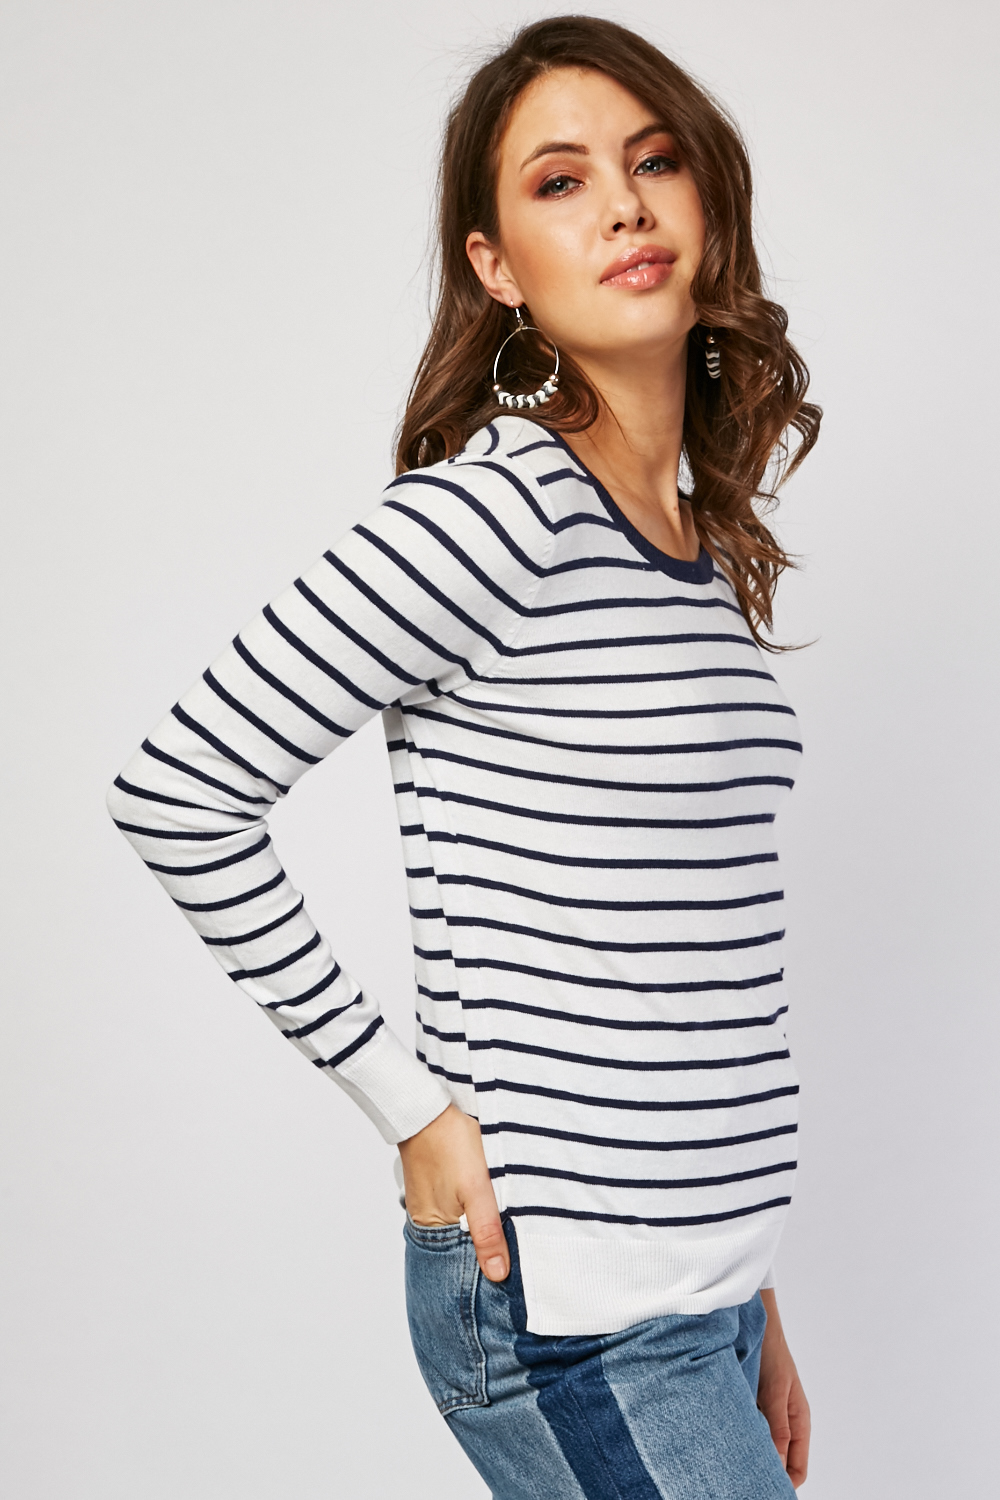 Crew Neck Striped Knit Top - Just $7